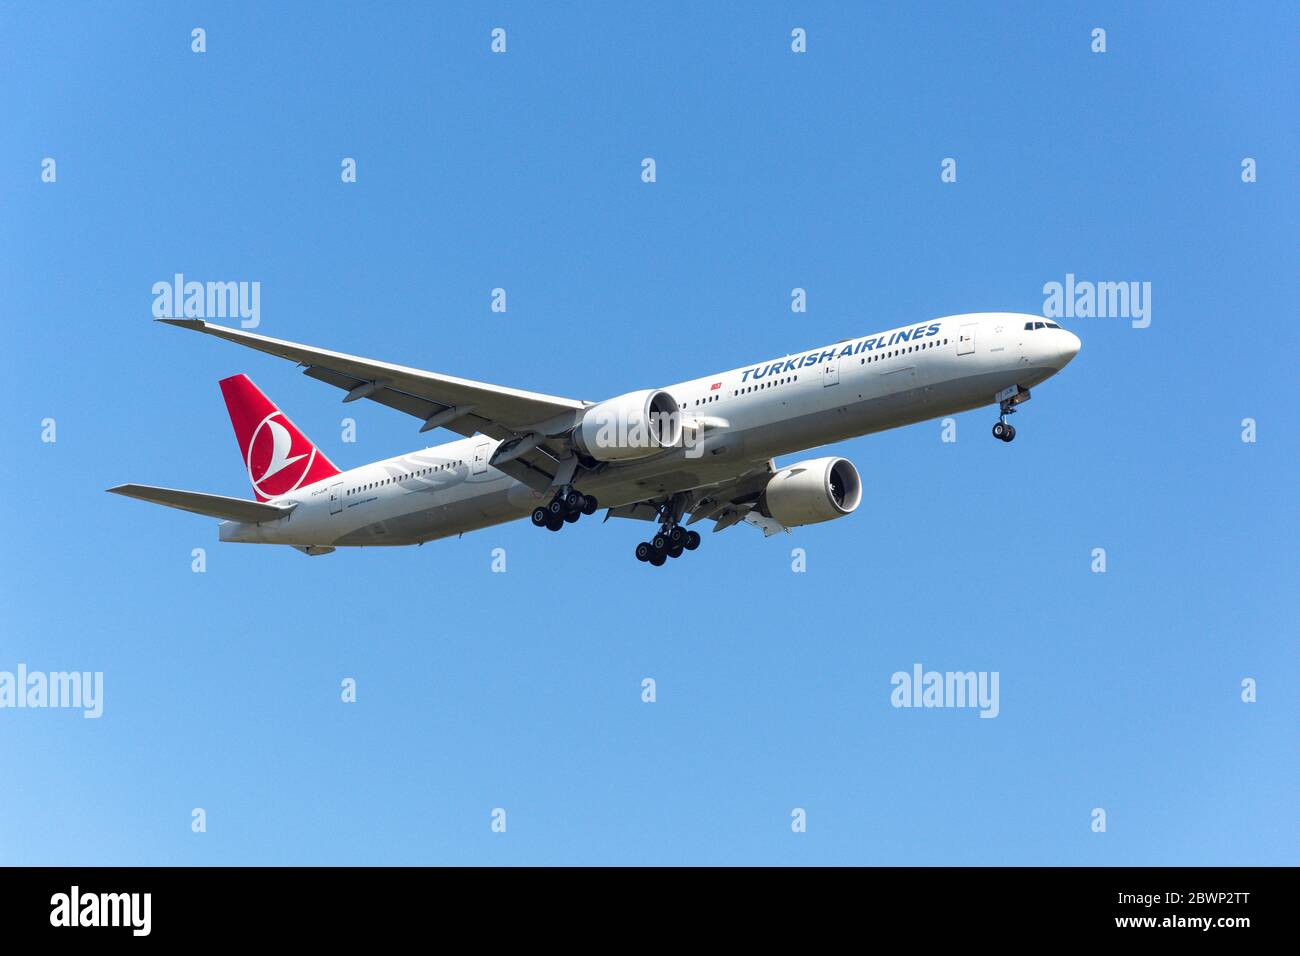 Turkish Airlines Boeing 777 -300 aircraft landing at Heathrow Airport, London Borough of Hillingdon, Greater London, England, United Kingdom Stock Photo